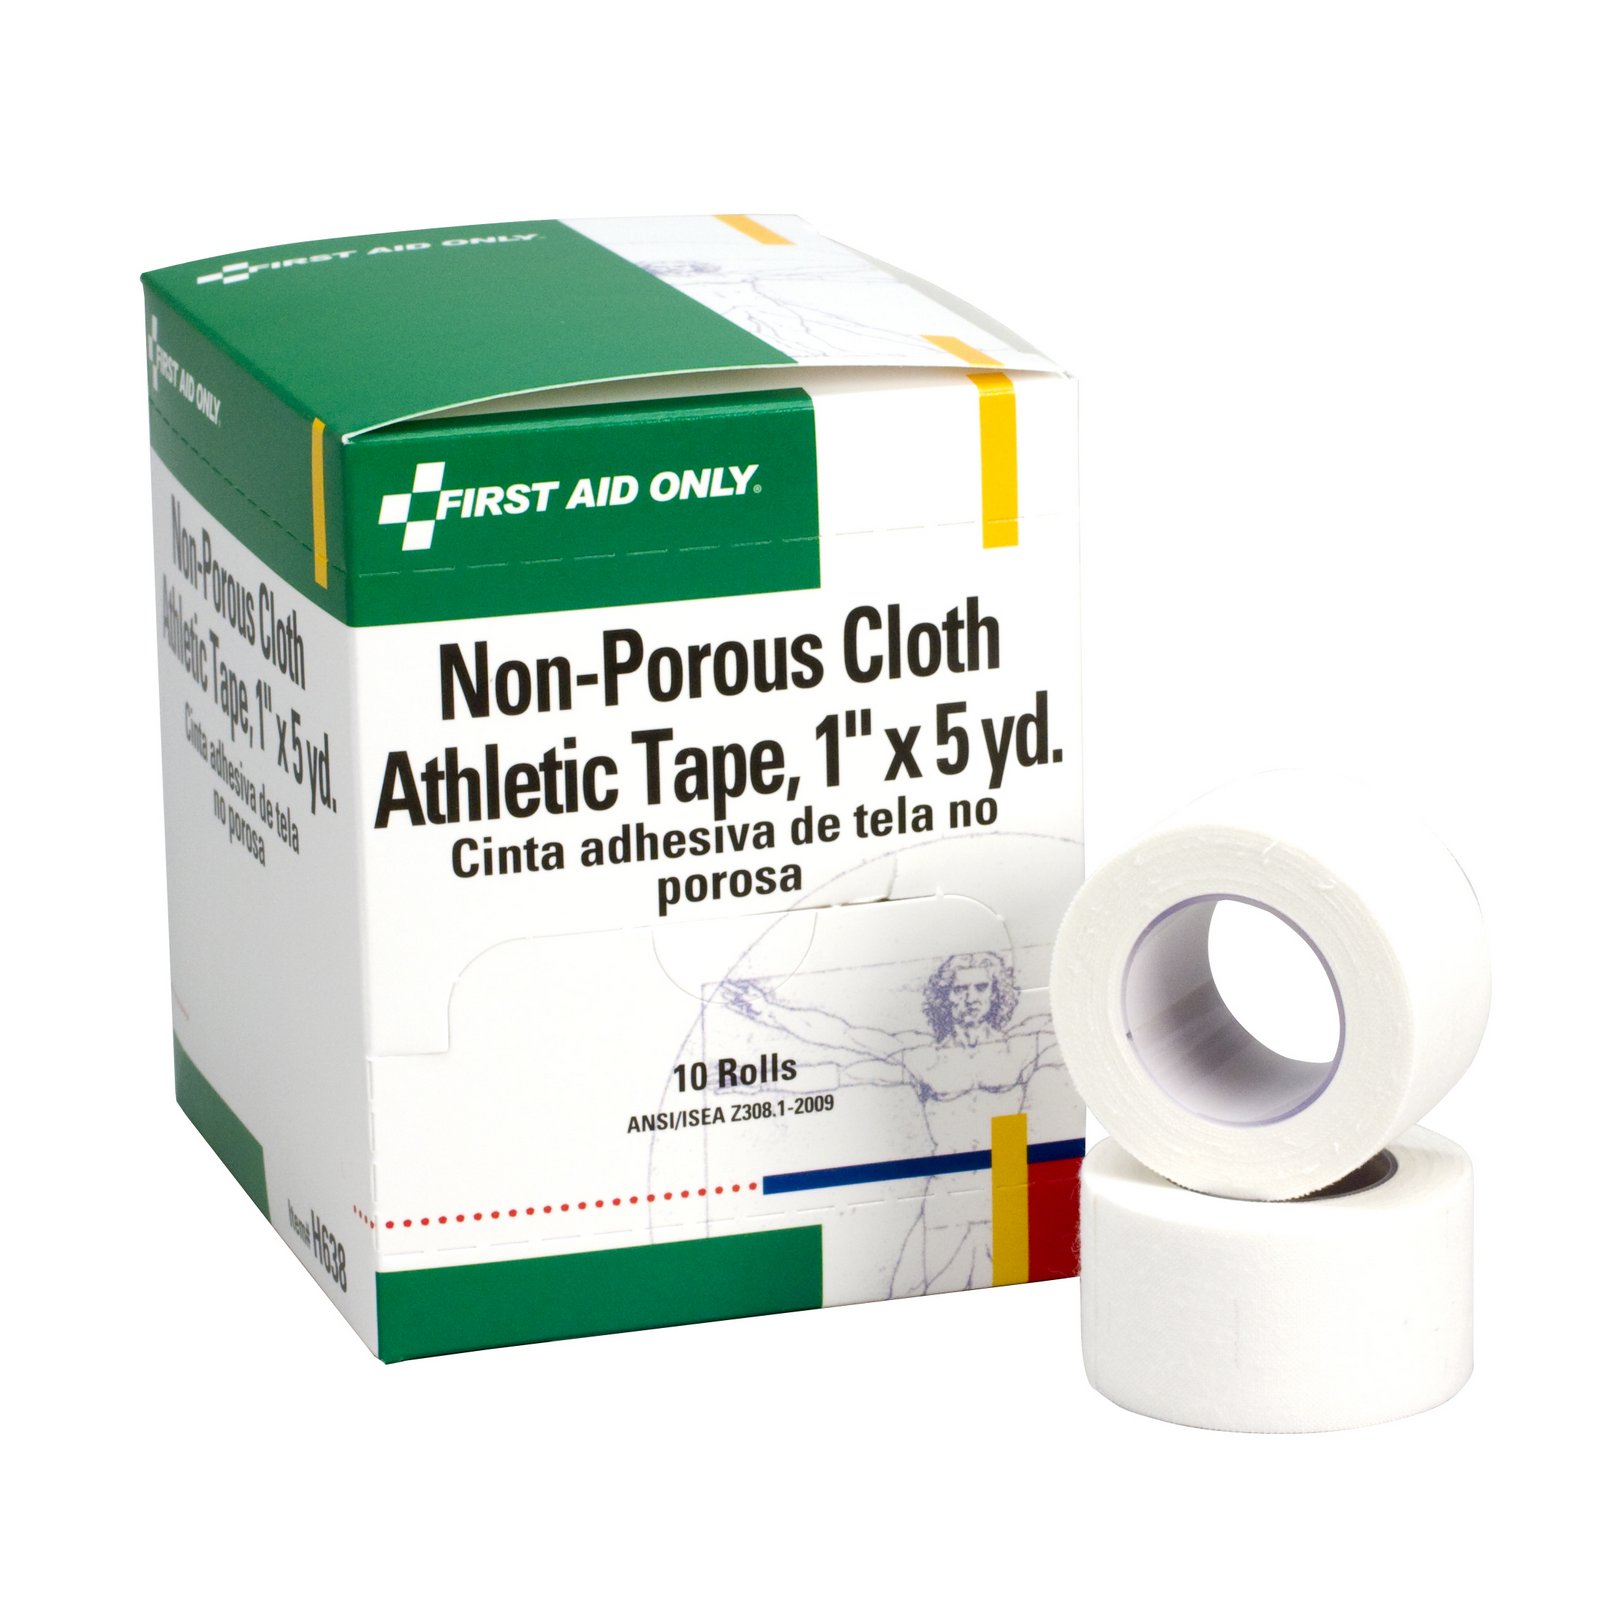 First Aid Only® Athletic Non-Porous Cloth Tape